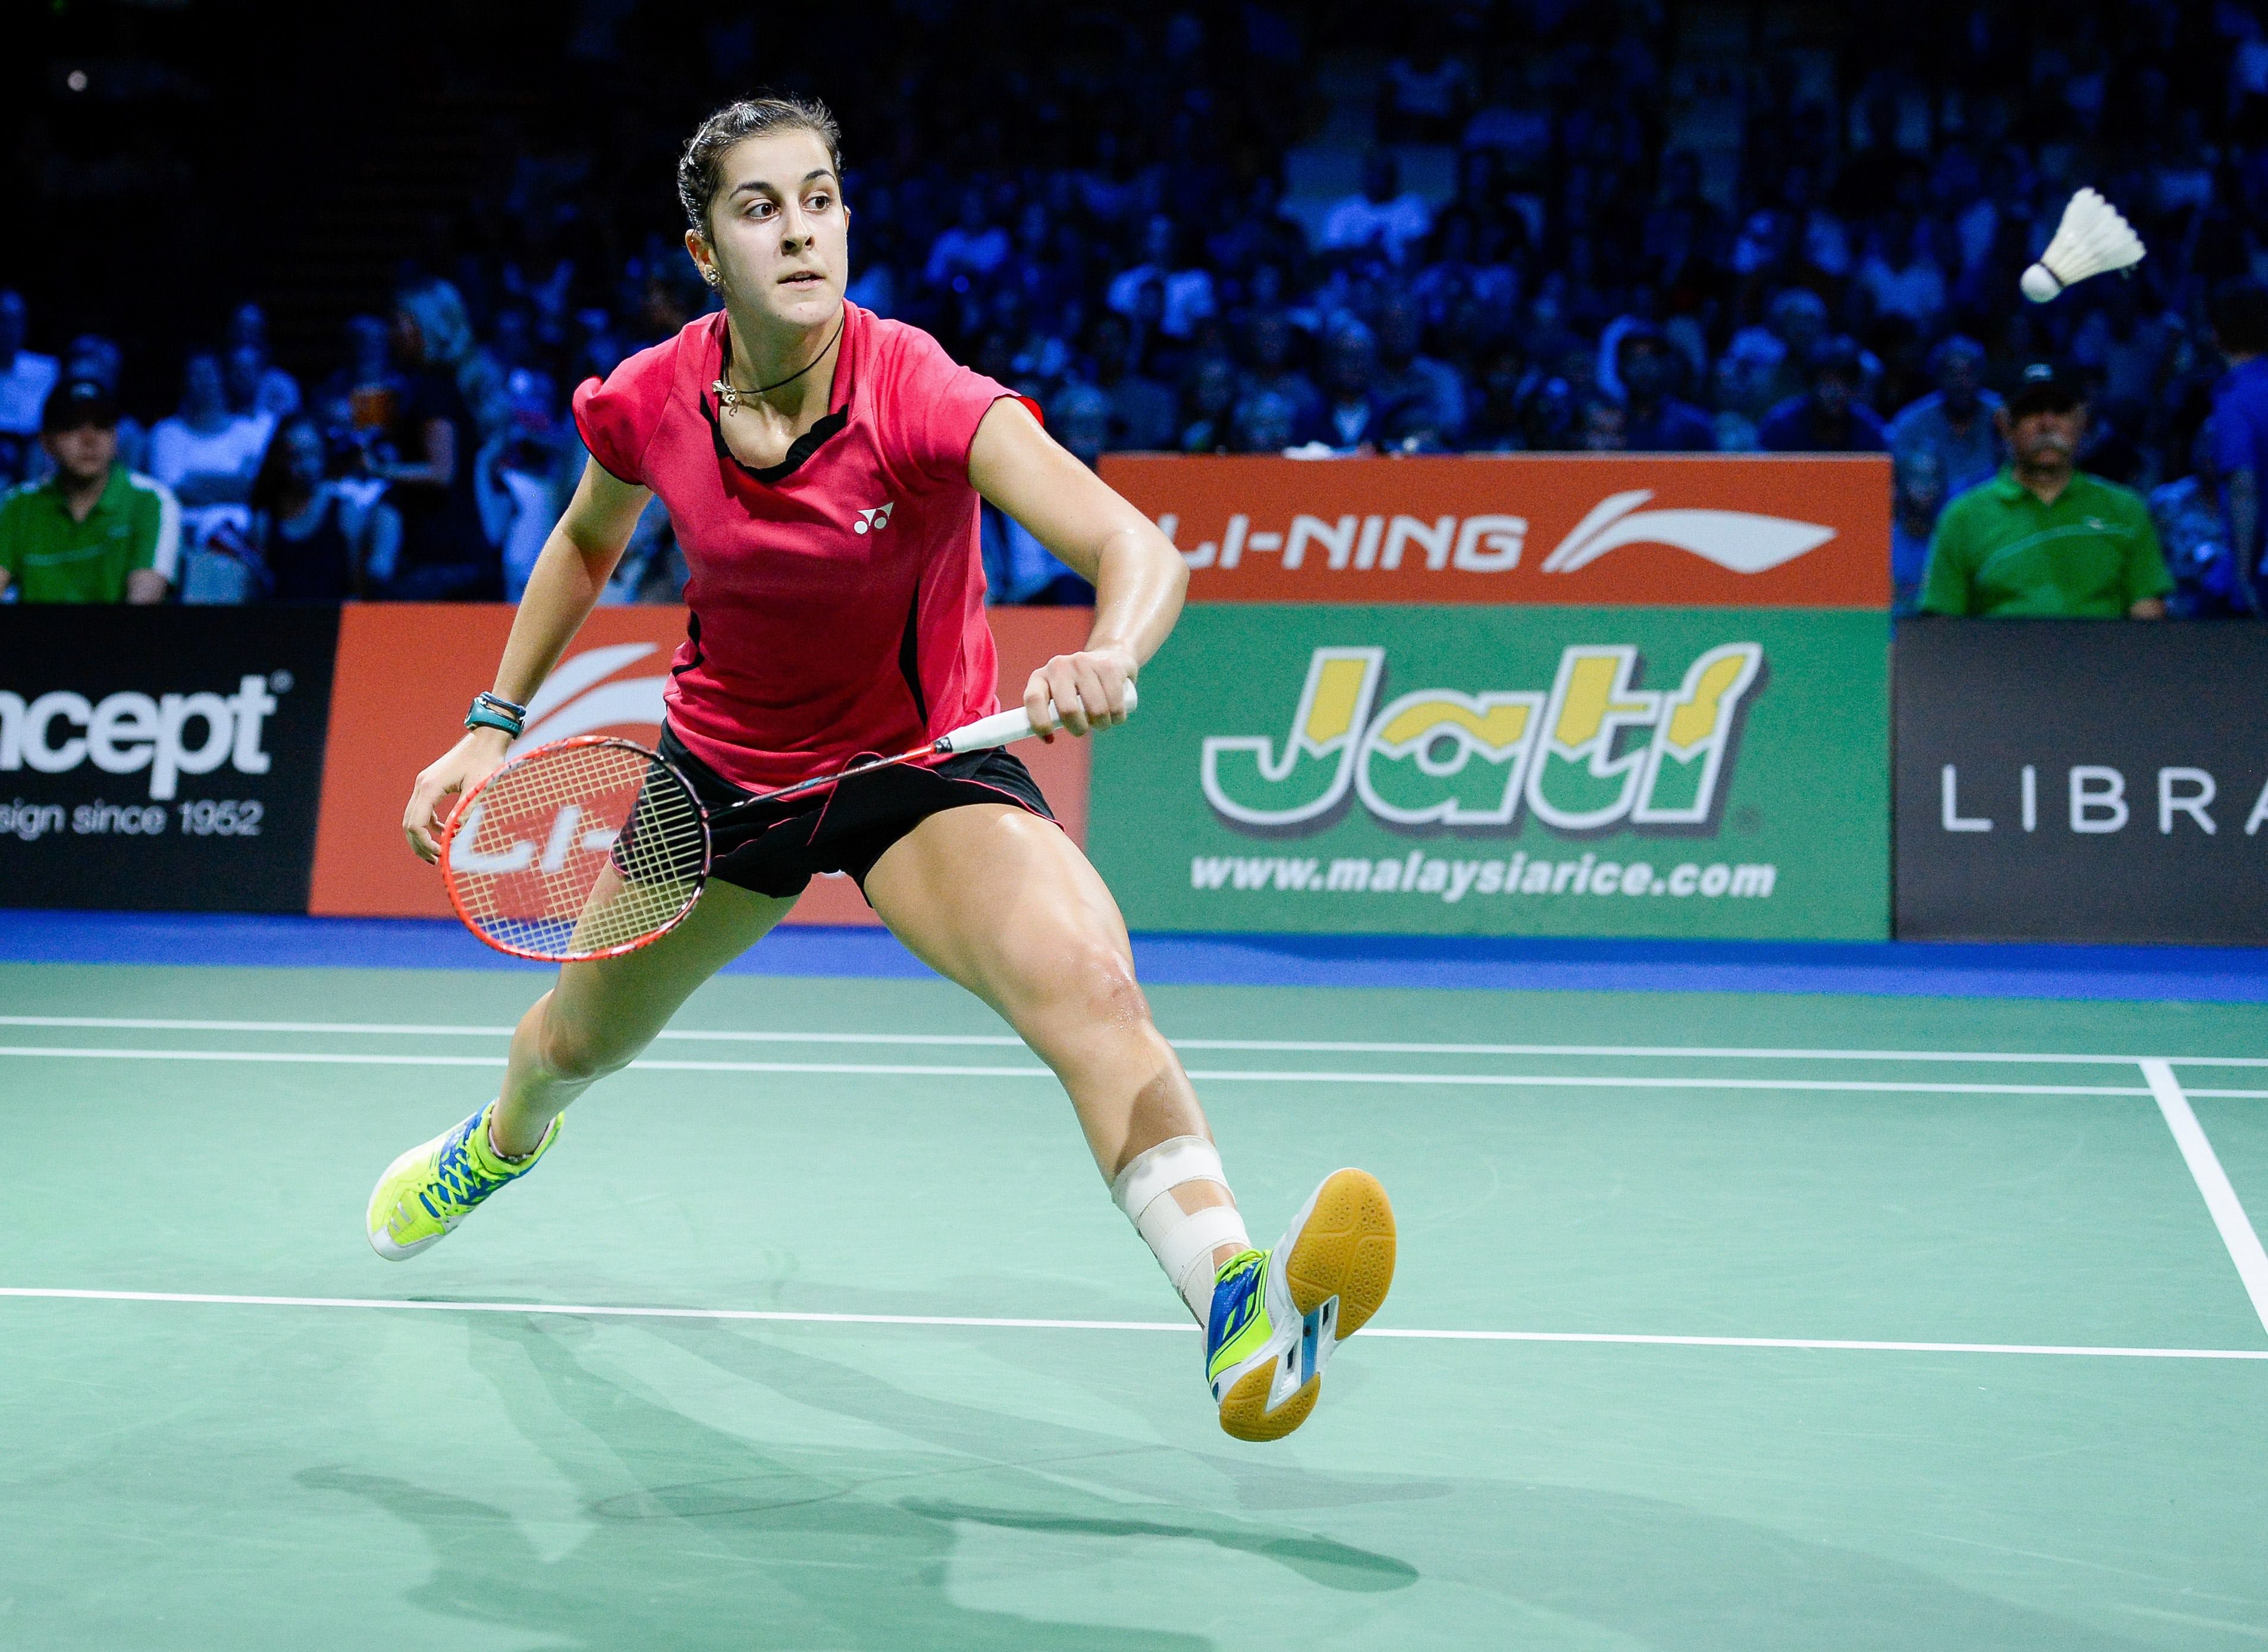 Spain’s Carolina Marin competes against India’s Sindhu P.V.during the womens single semi final match at the 2014 BWF Badminton World championships held at the Ballerup Super Arena in Copenhagen on August 30, 2014. AFP PHOTO/JONATHAN NACKSTRAND